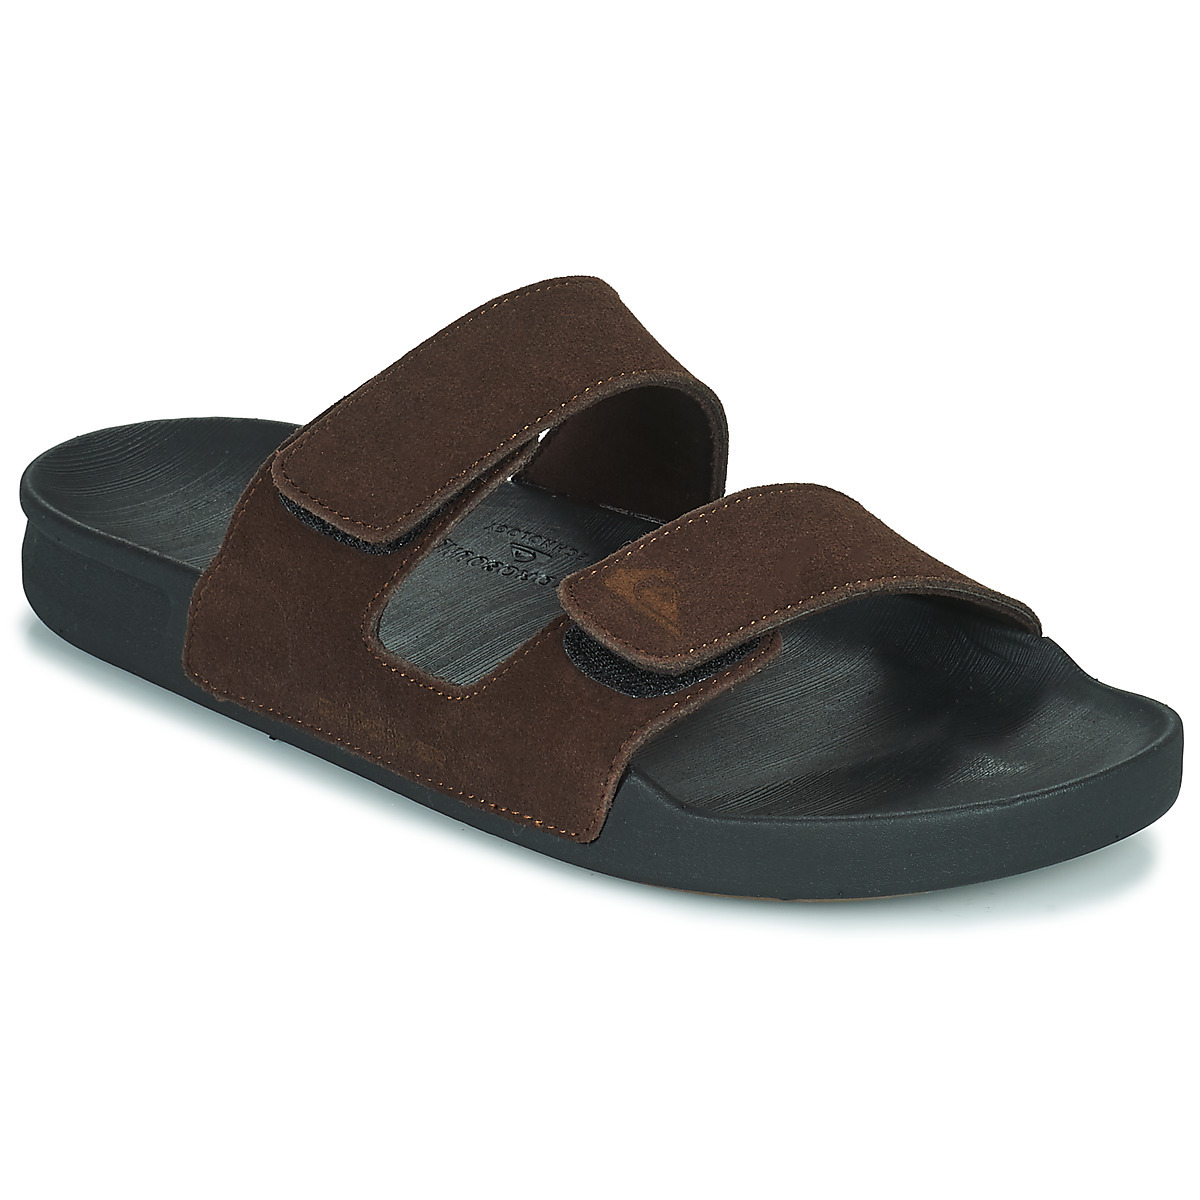 Quiksilver Gent Slippers in Brown at Spartoo GOOFASH